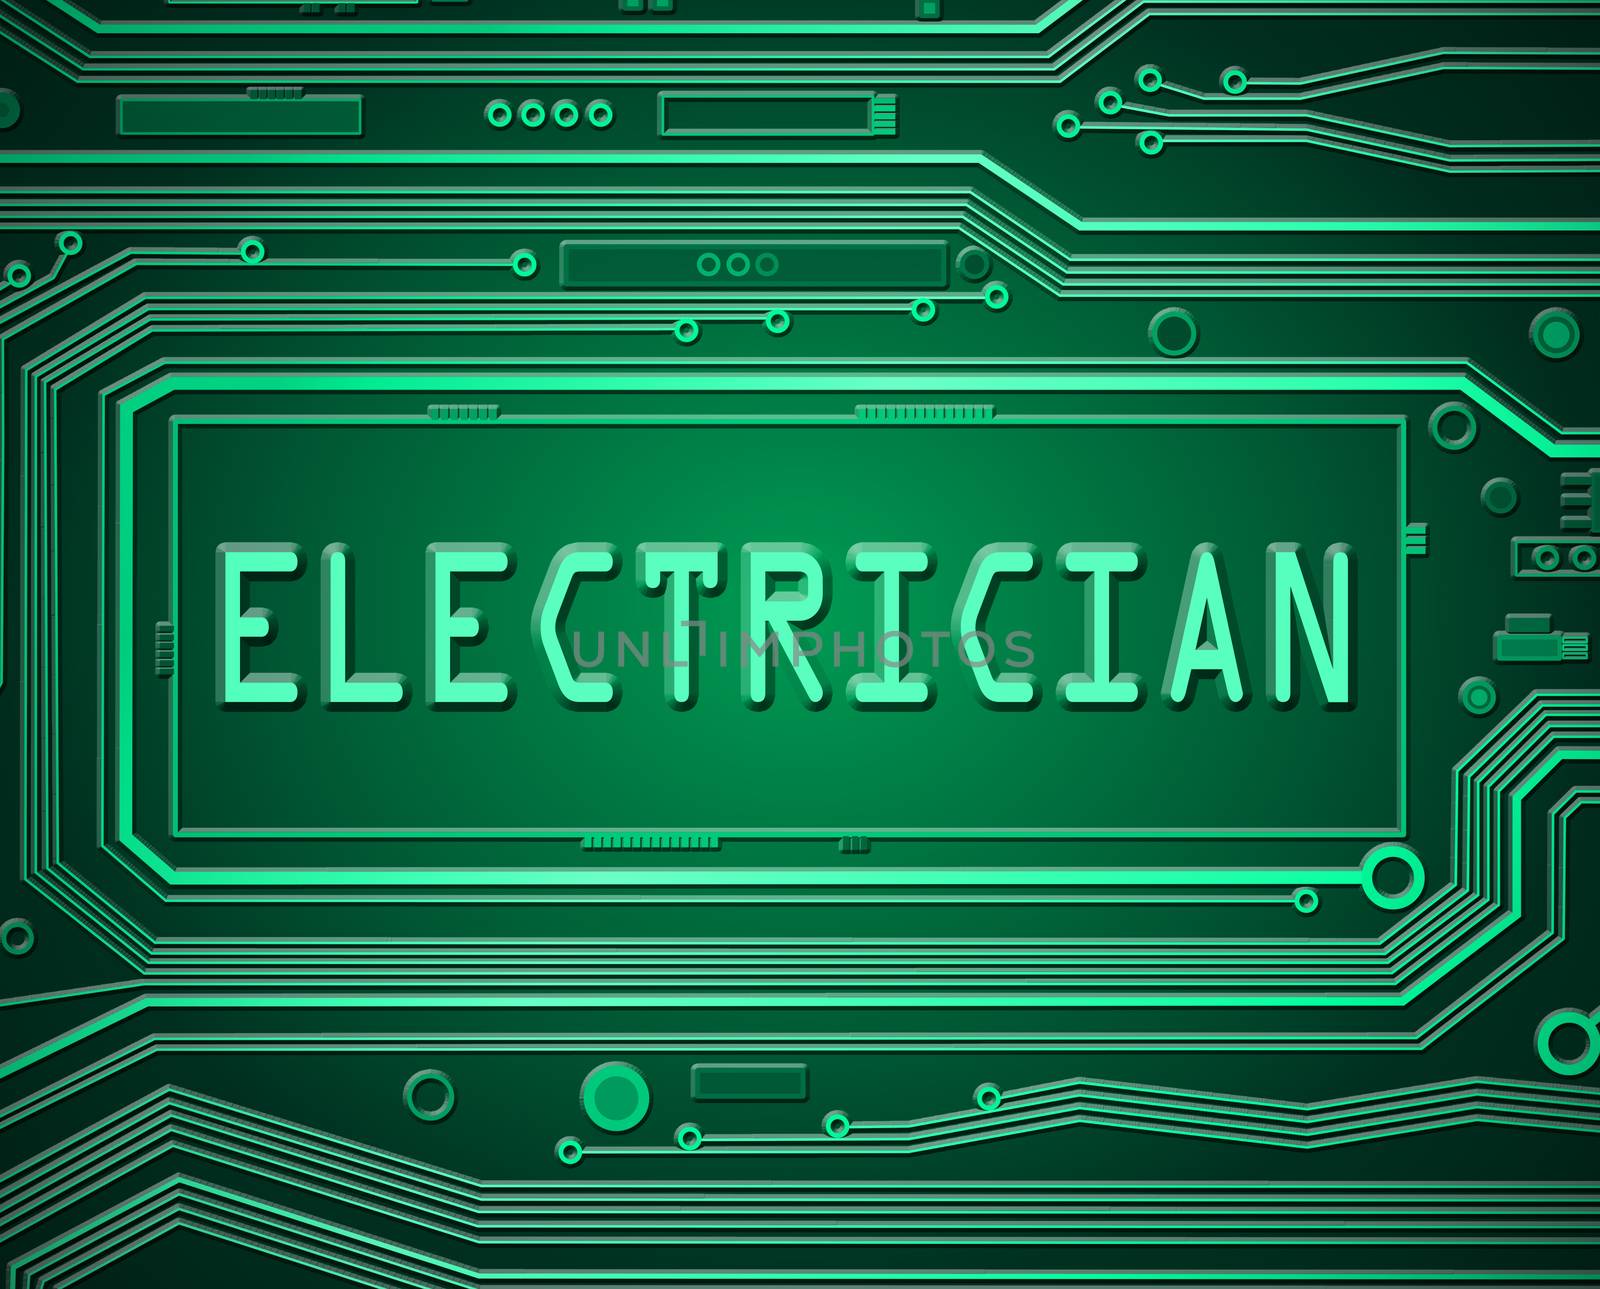 Abstract style illustration depicting printed circuit board components with an electrician concept.